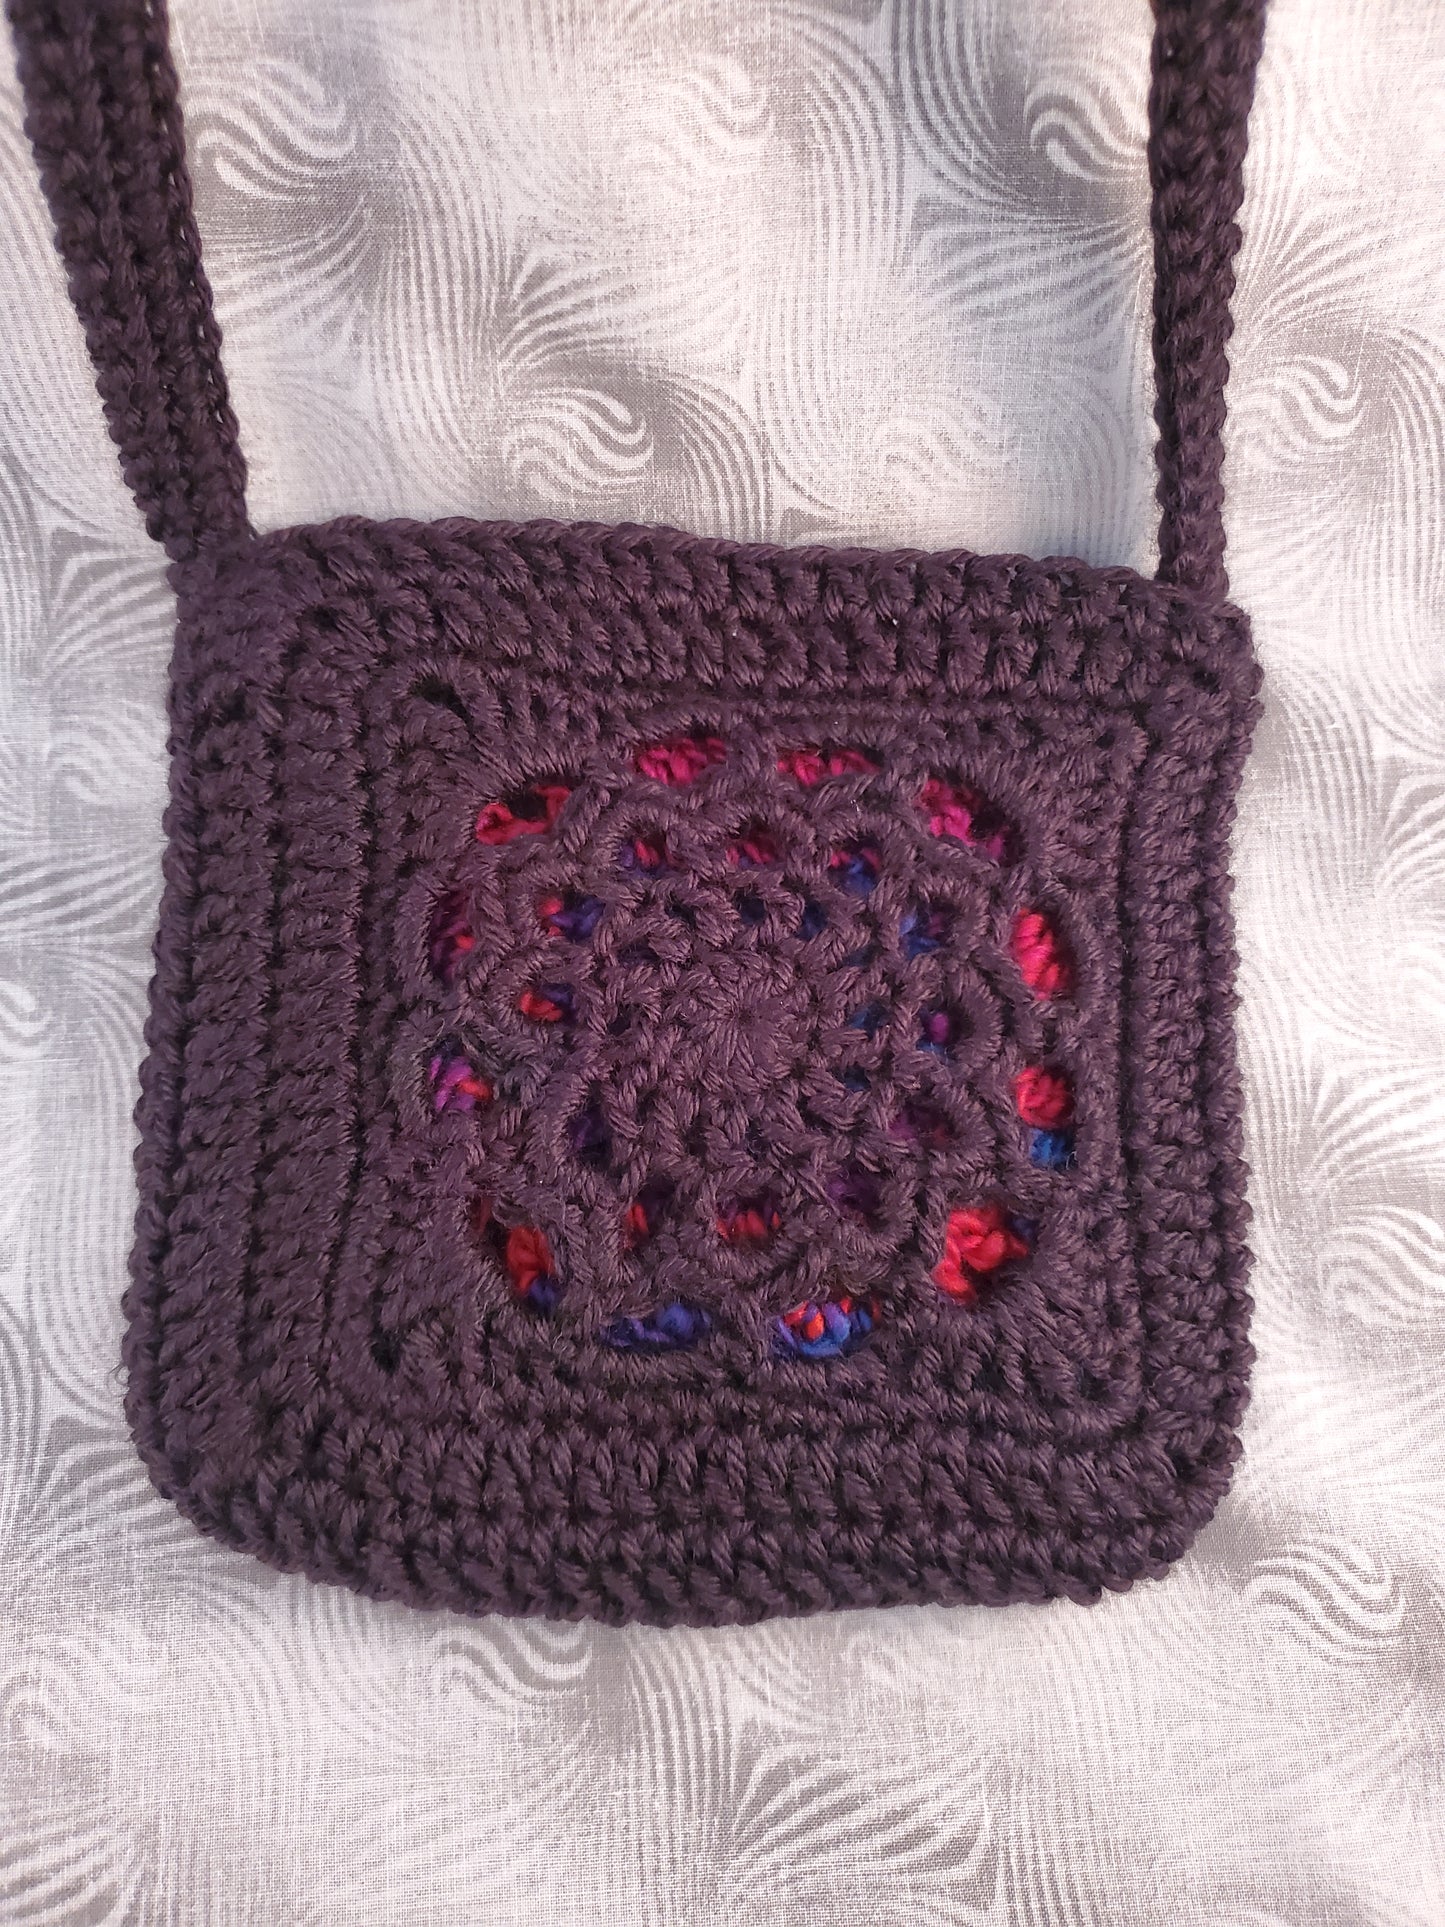 Rose Window Stained Glass Crochet Purse